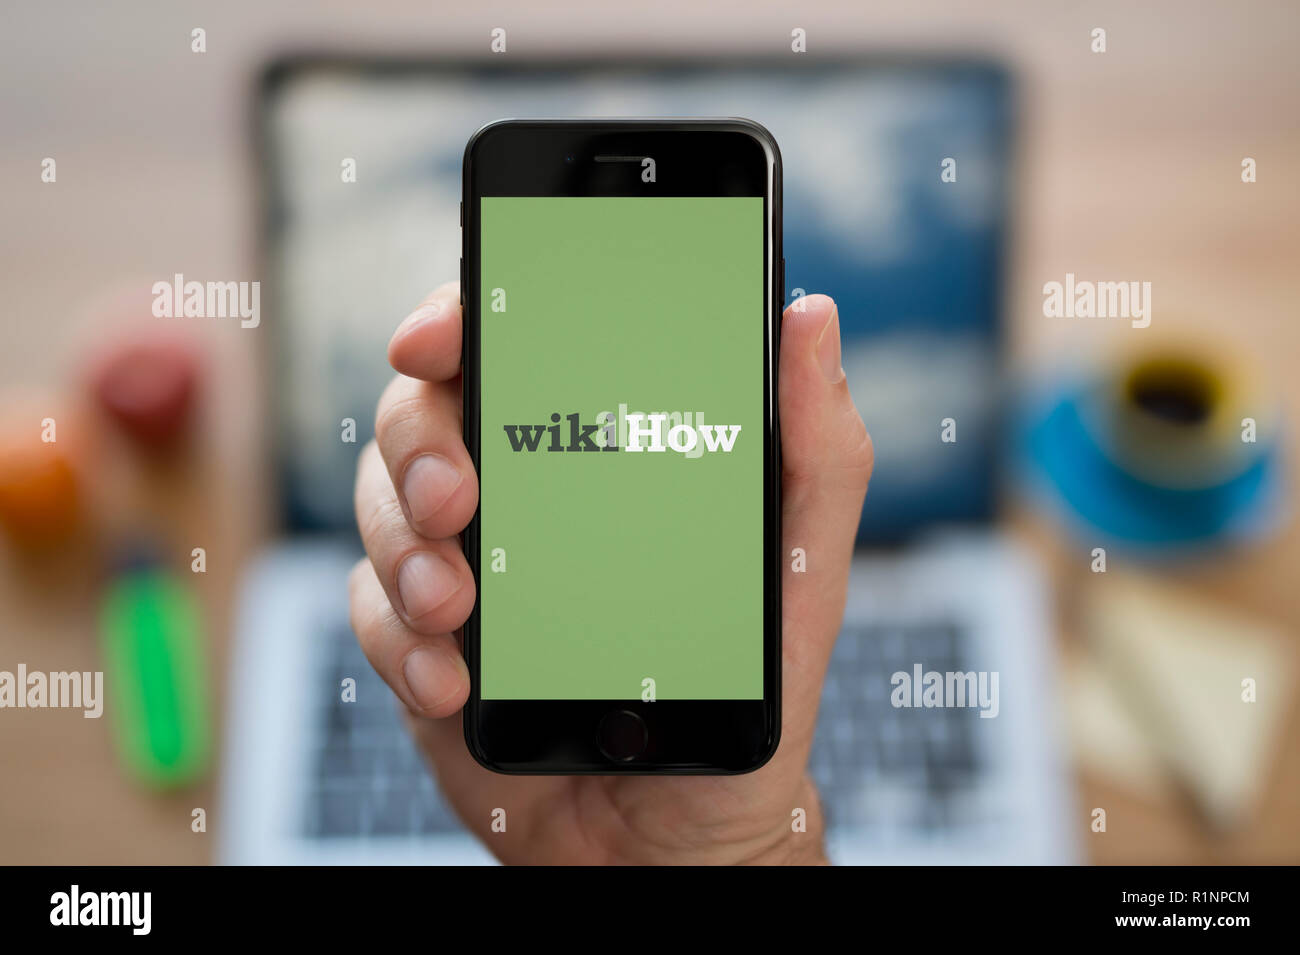 A man looks at his iPhone which displays the WikiHow logo, while sat at his computer desk (Editorial use only). Stock Photo